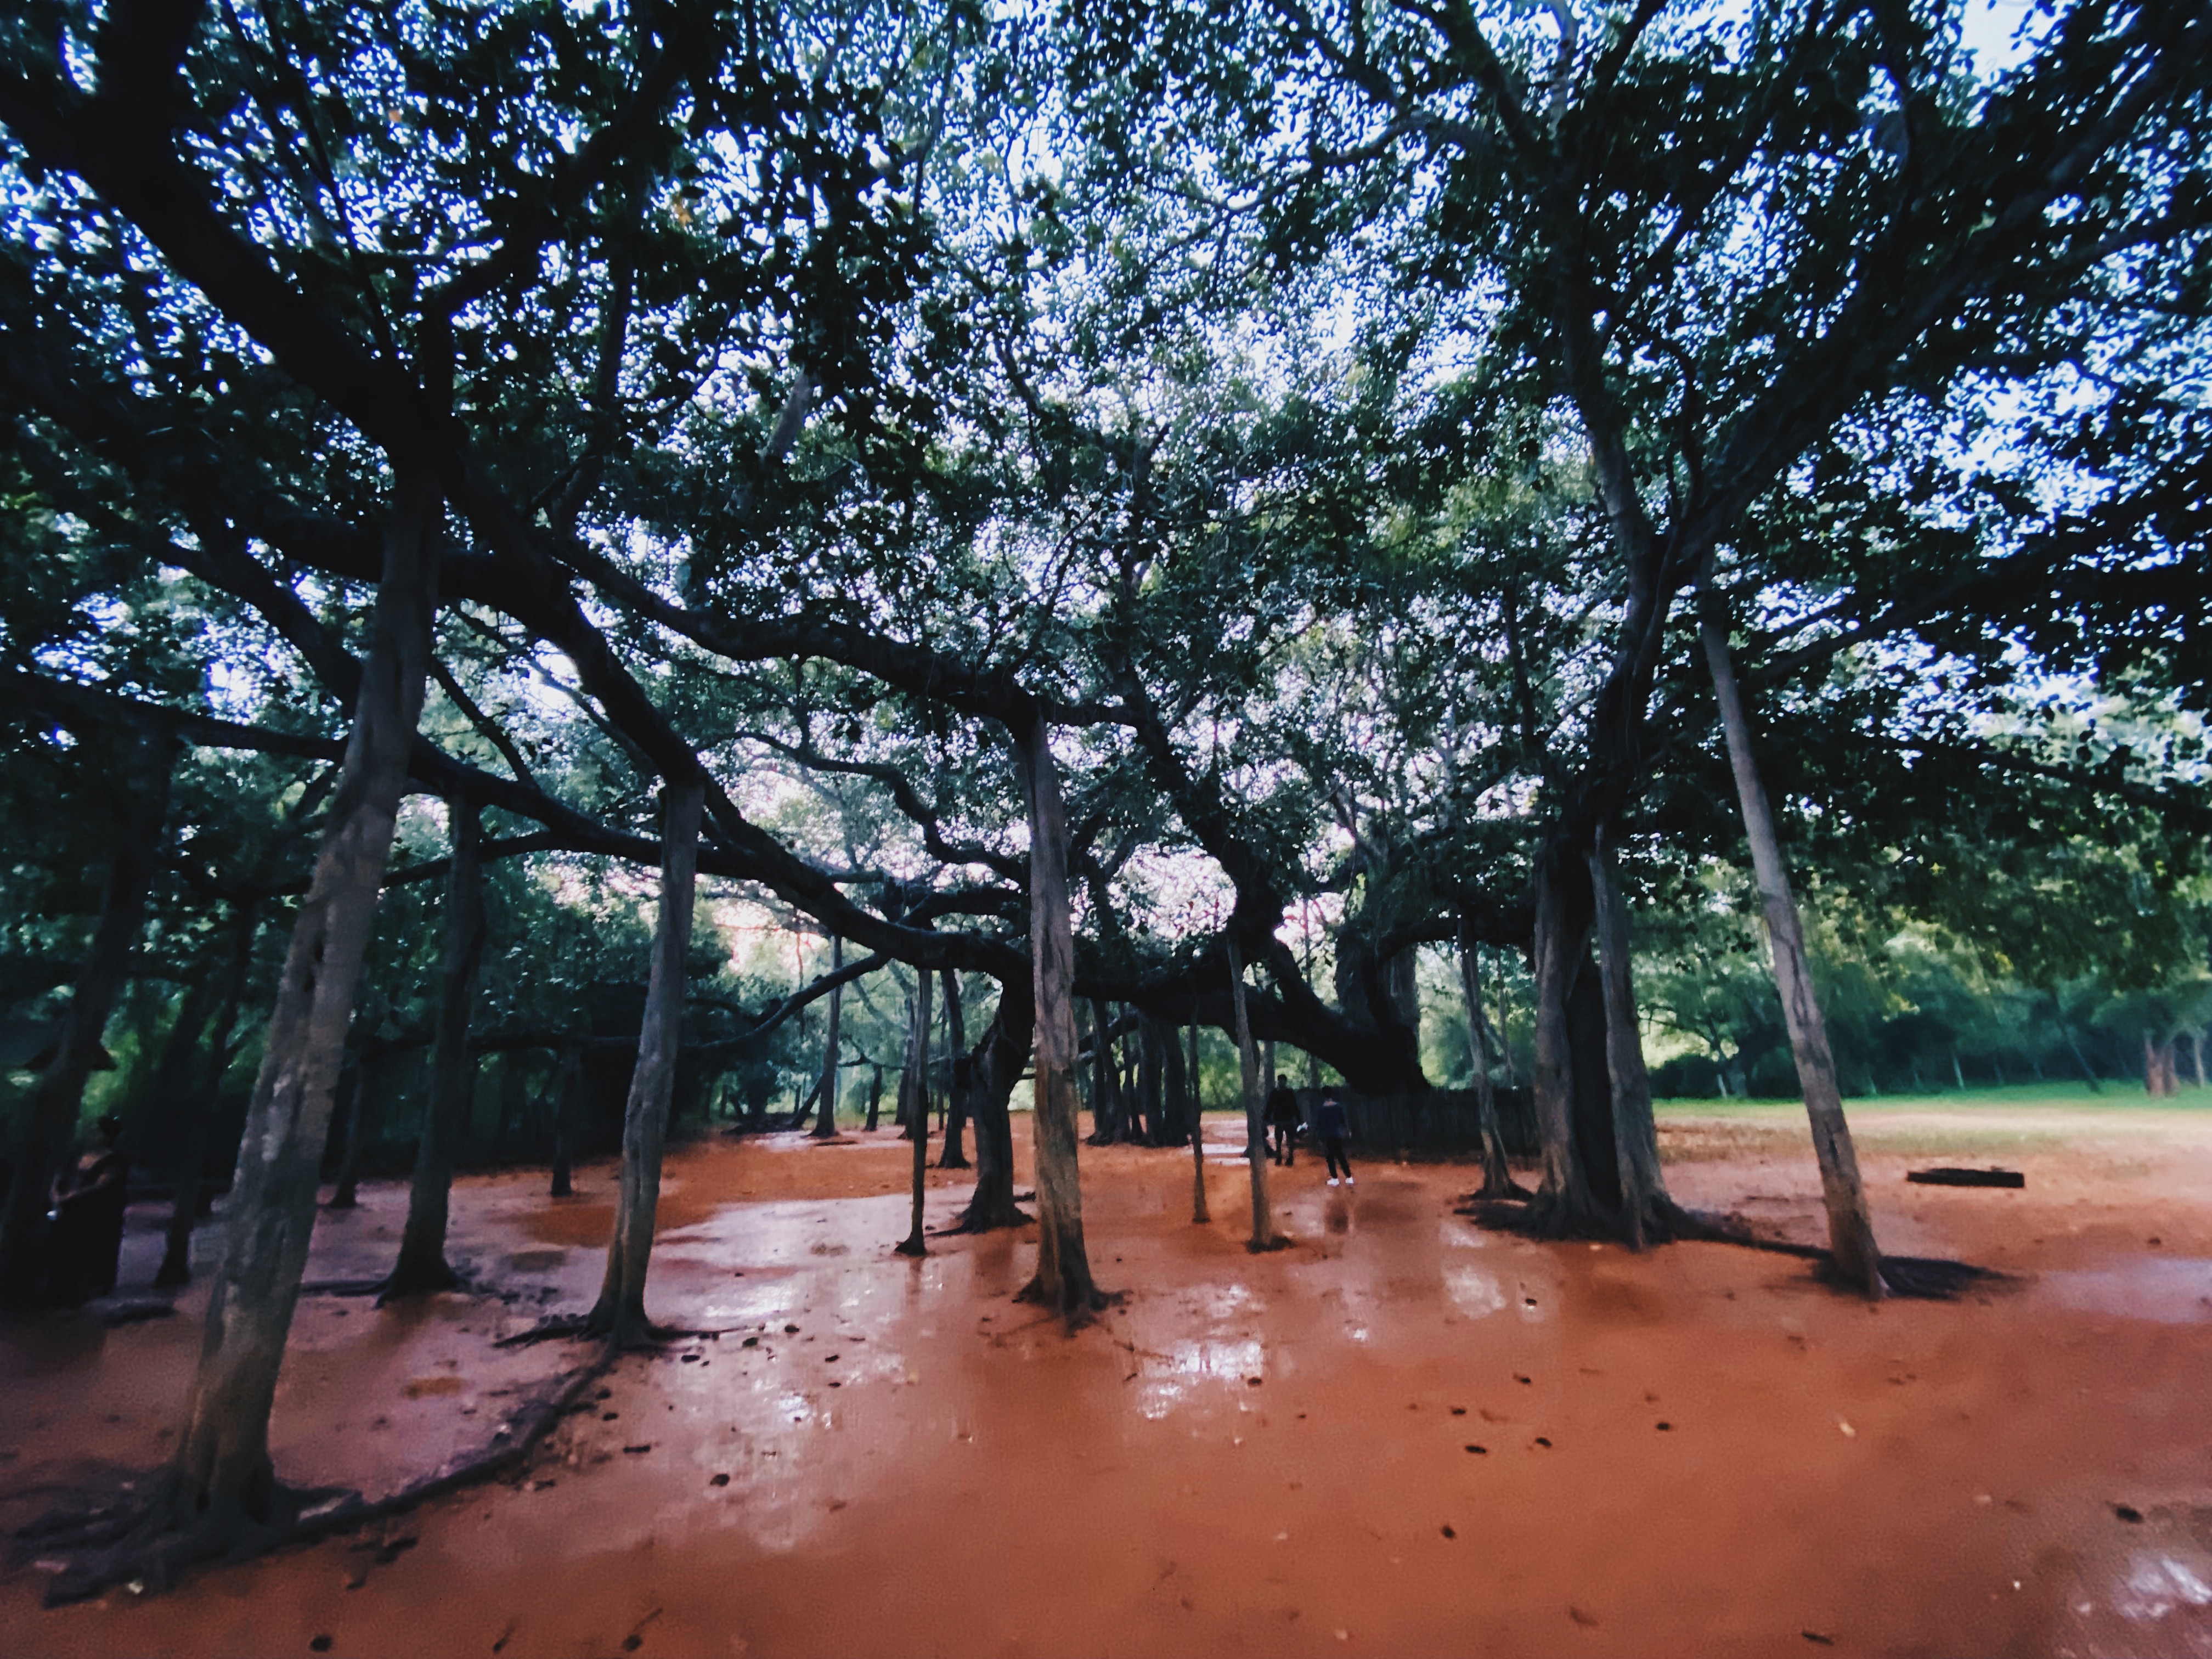 A huge Banyan tree, which is supposed to be the centre of Auroville